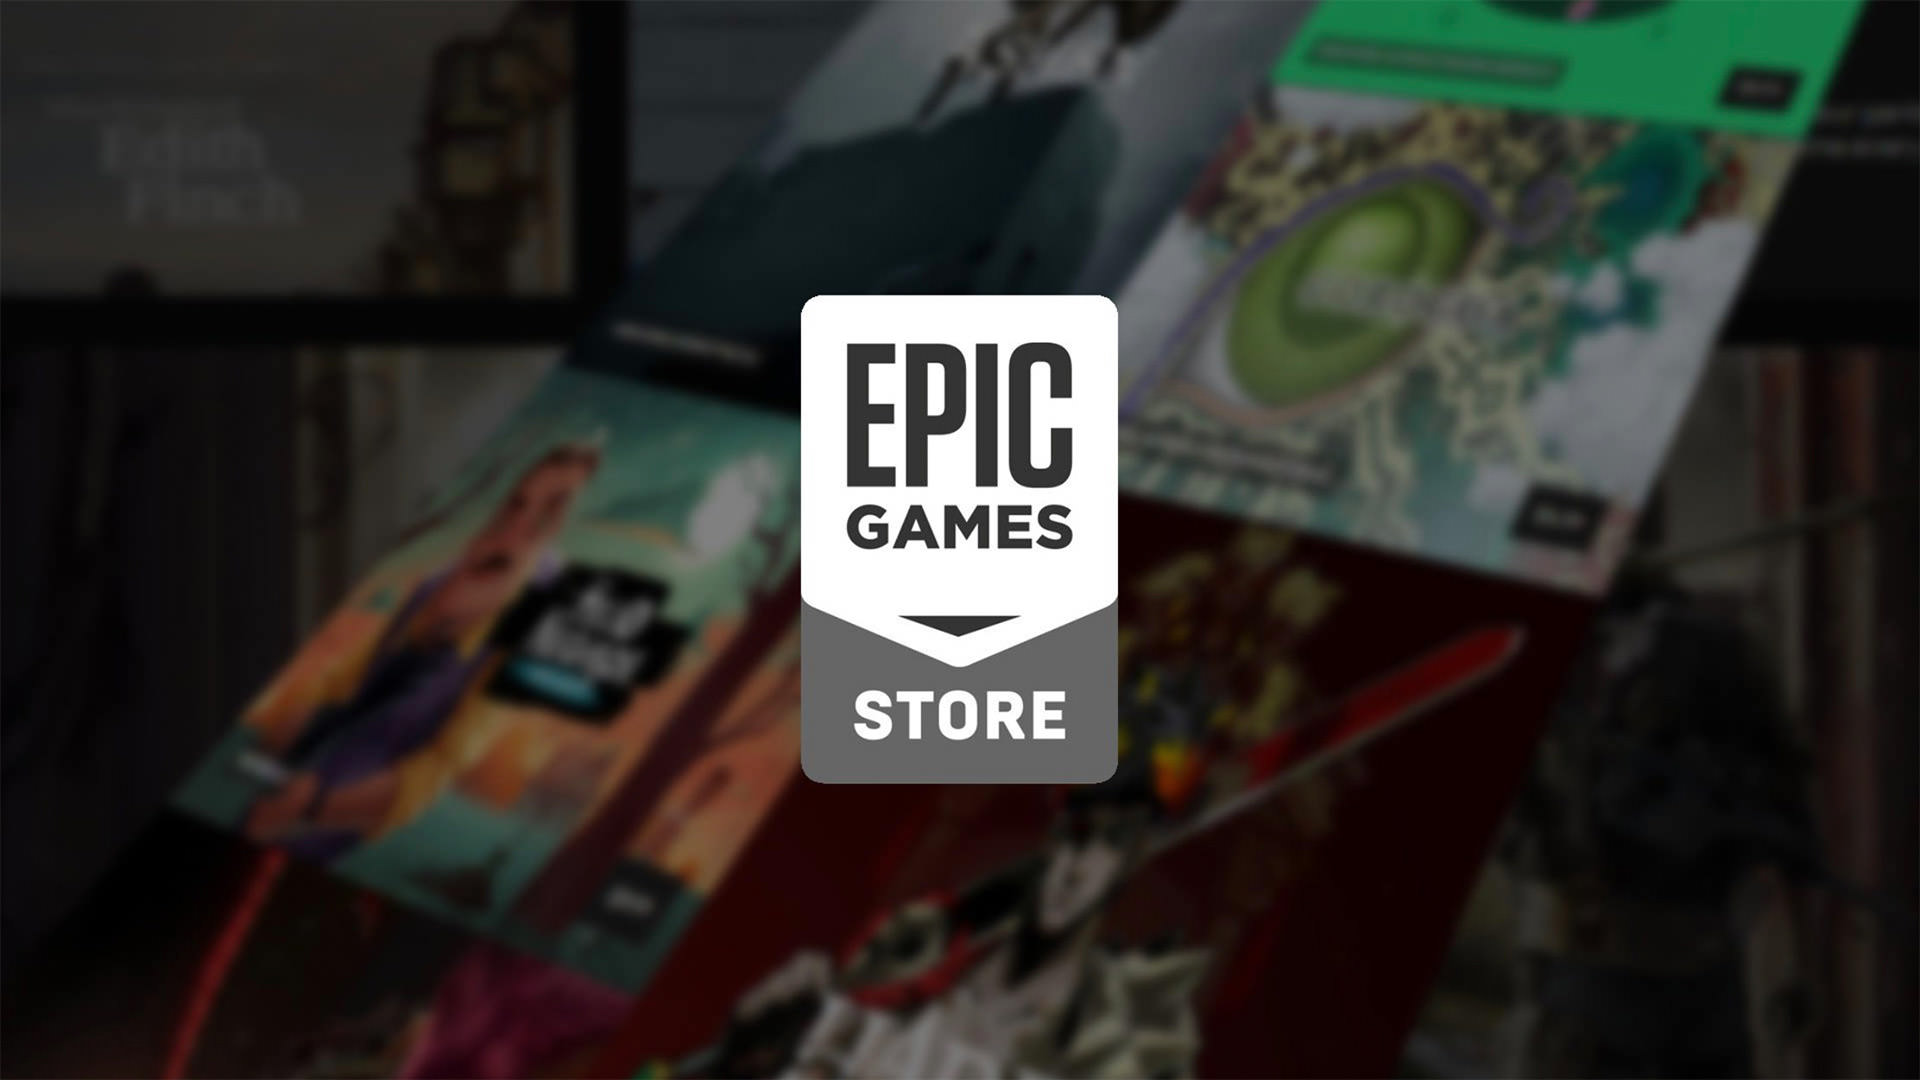 epic games store logo  Image of epic games store logo